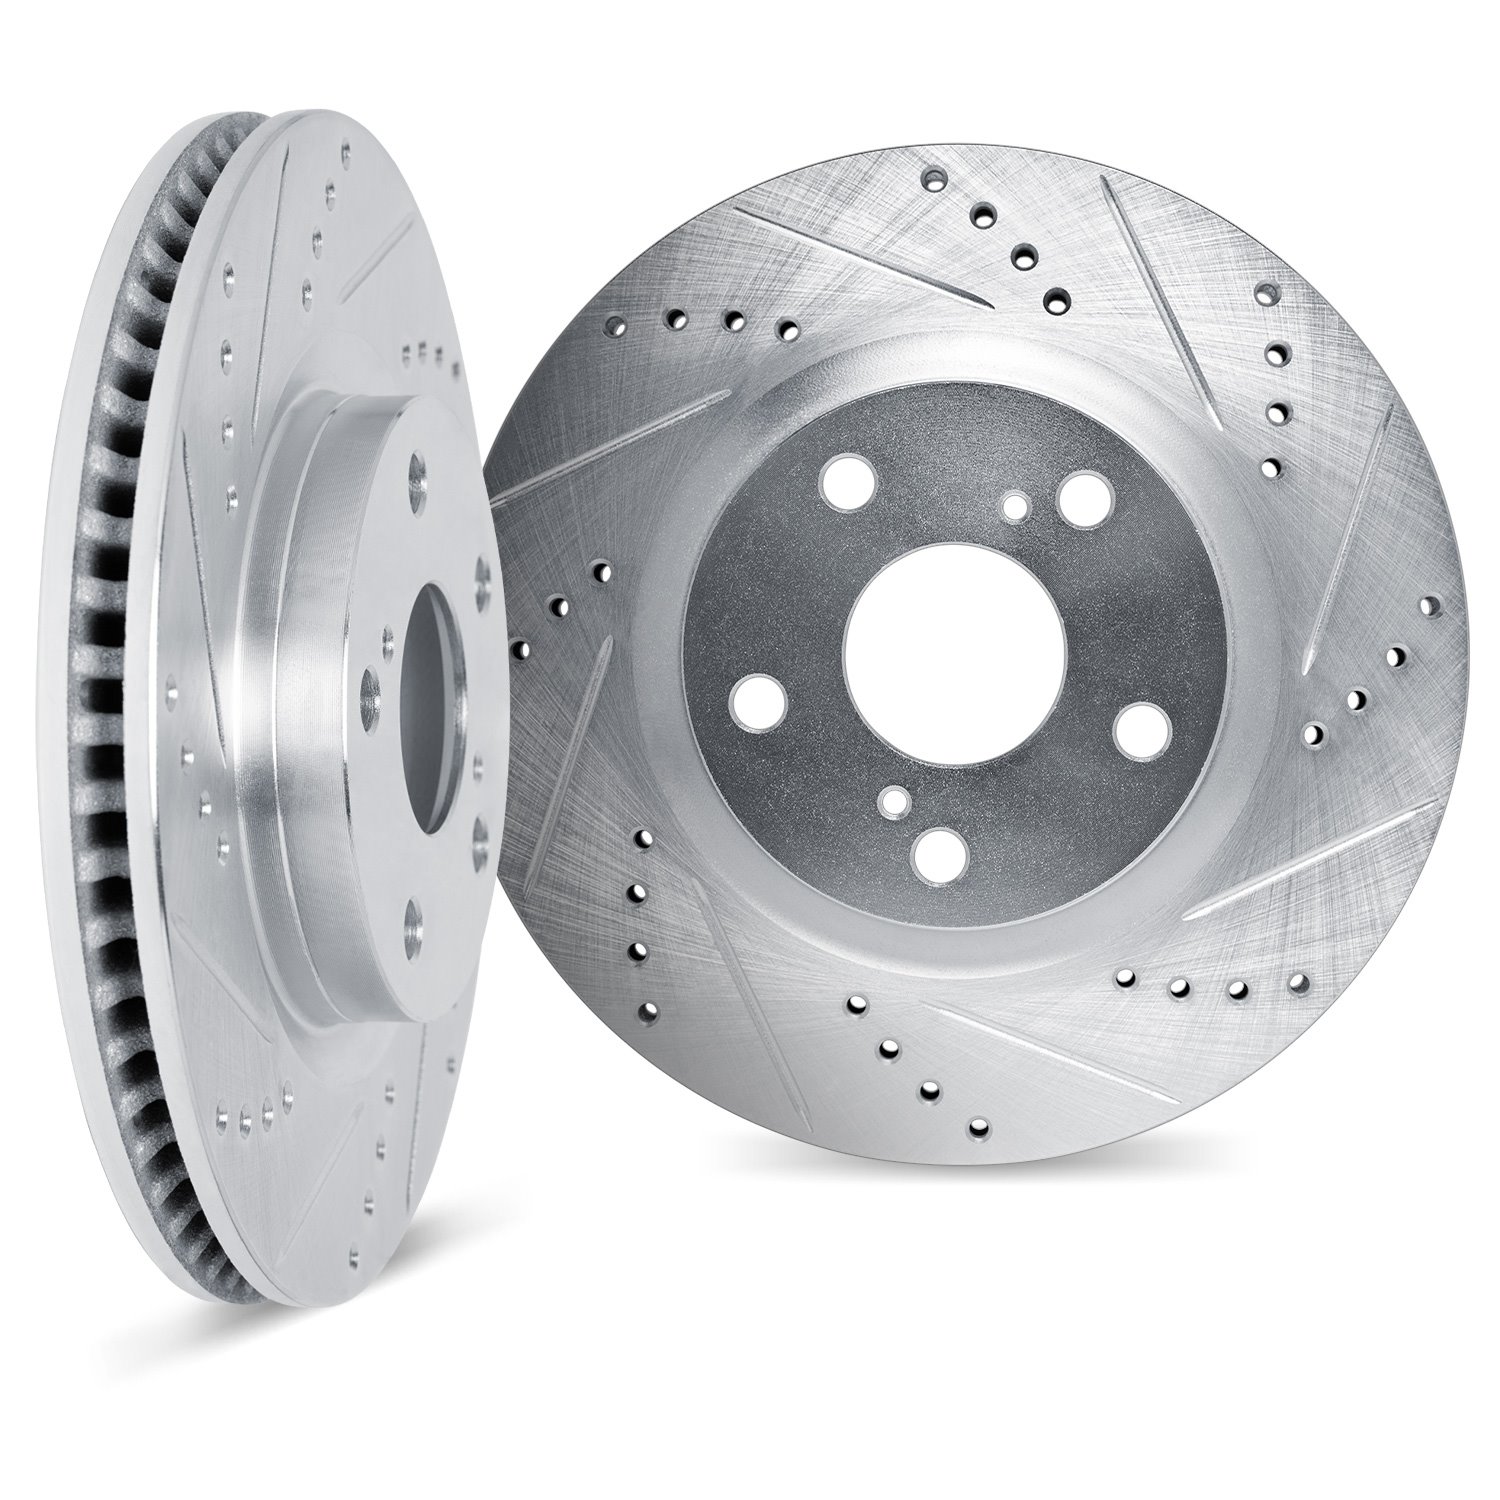 7002-58010 Drilled/Slotted Brake Rotors [Silver], Fits Select Acura/Honda, Position: Front